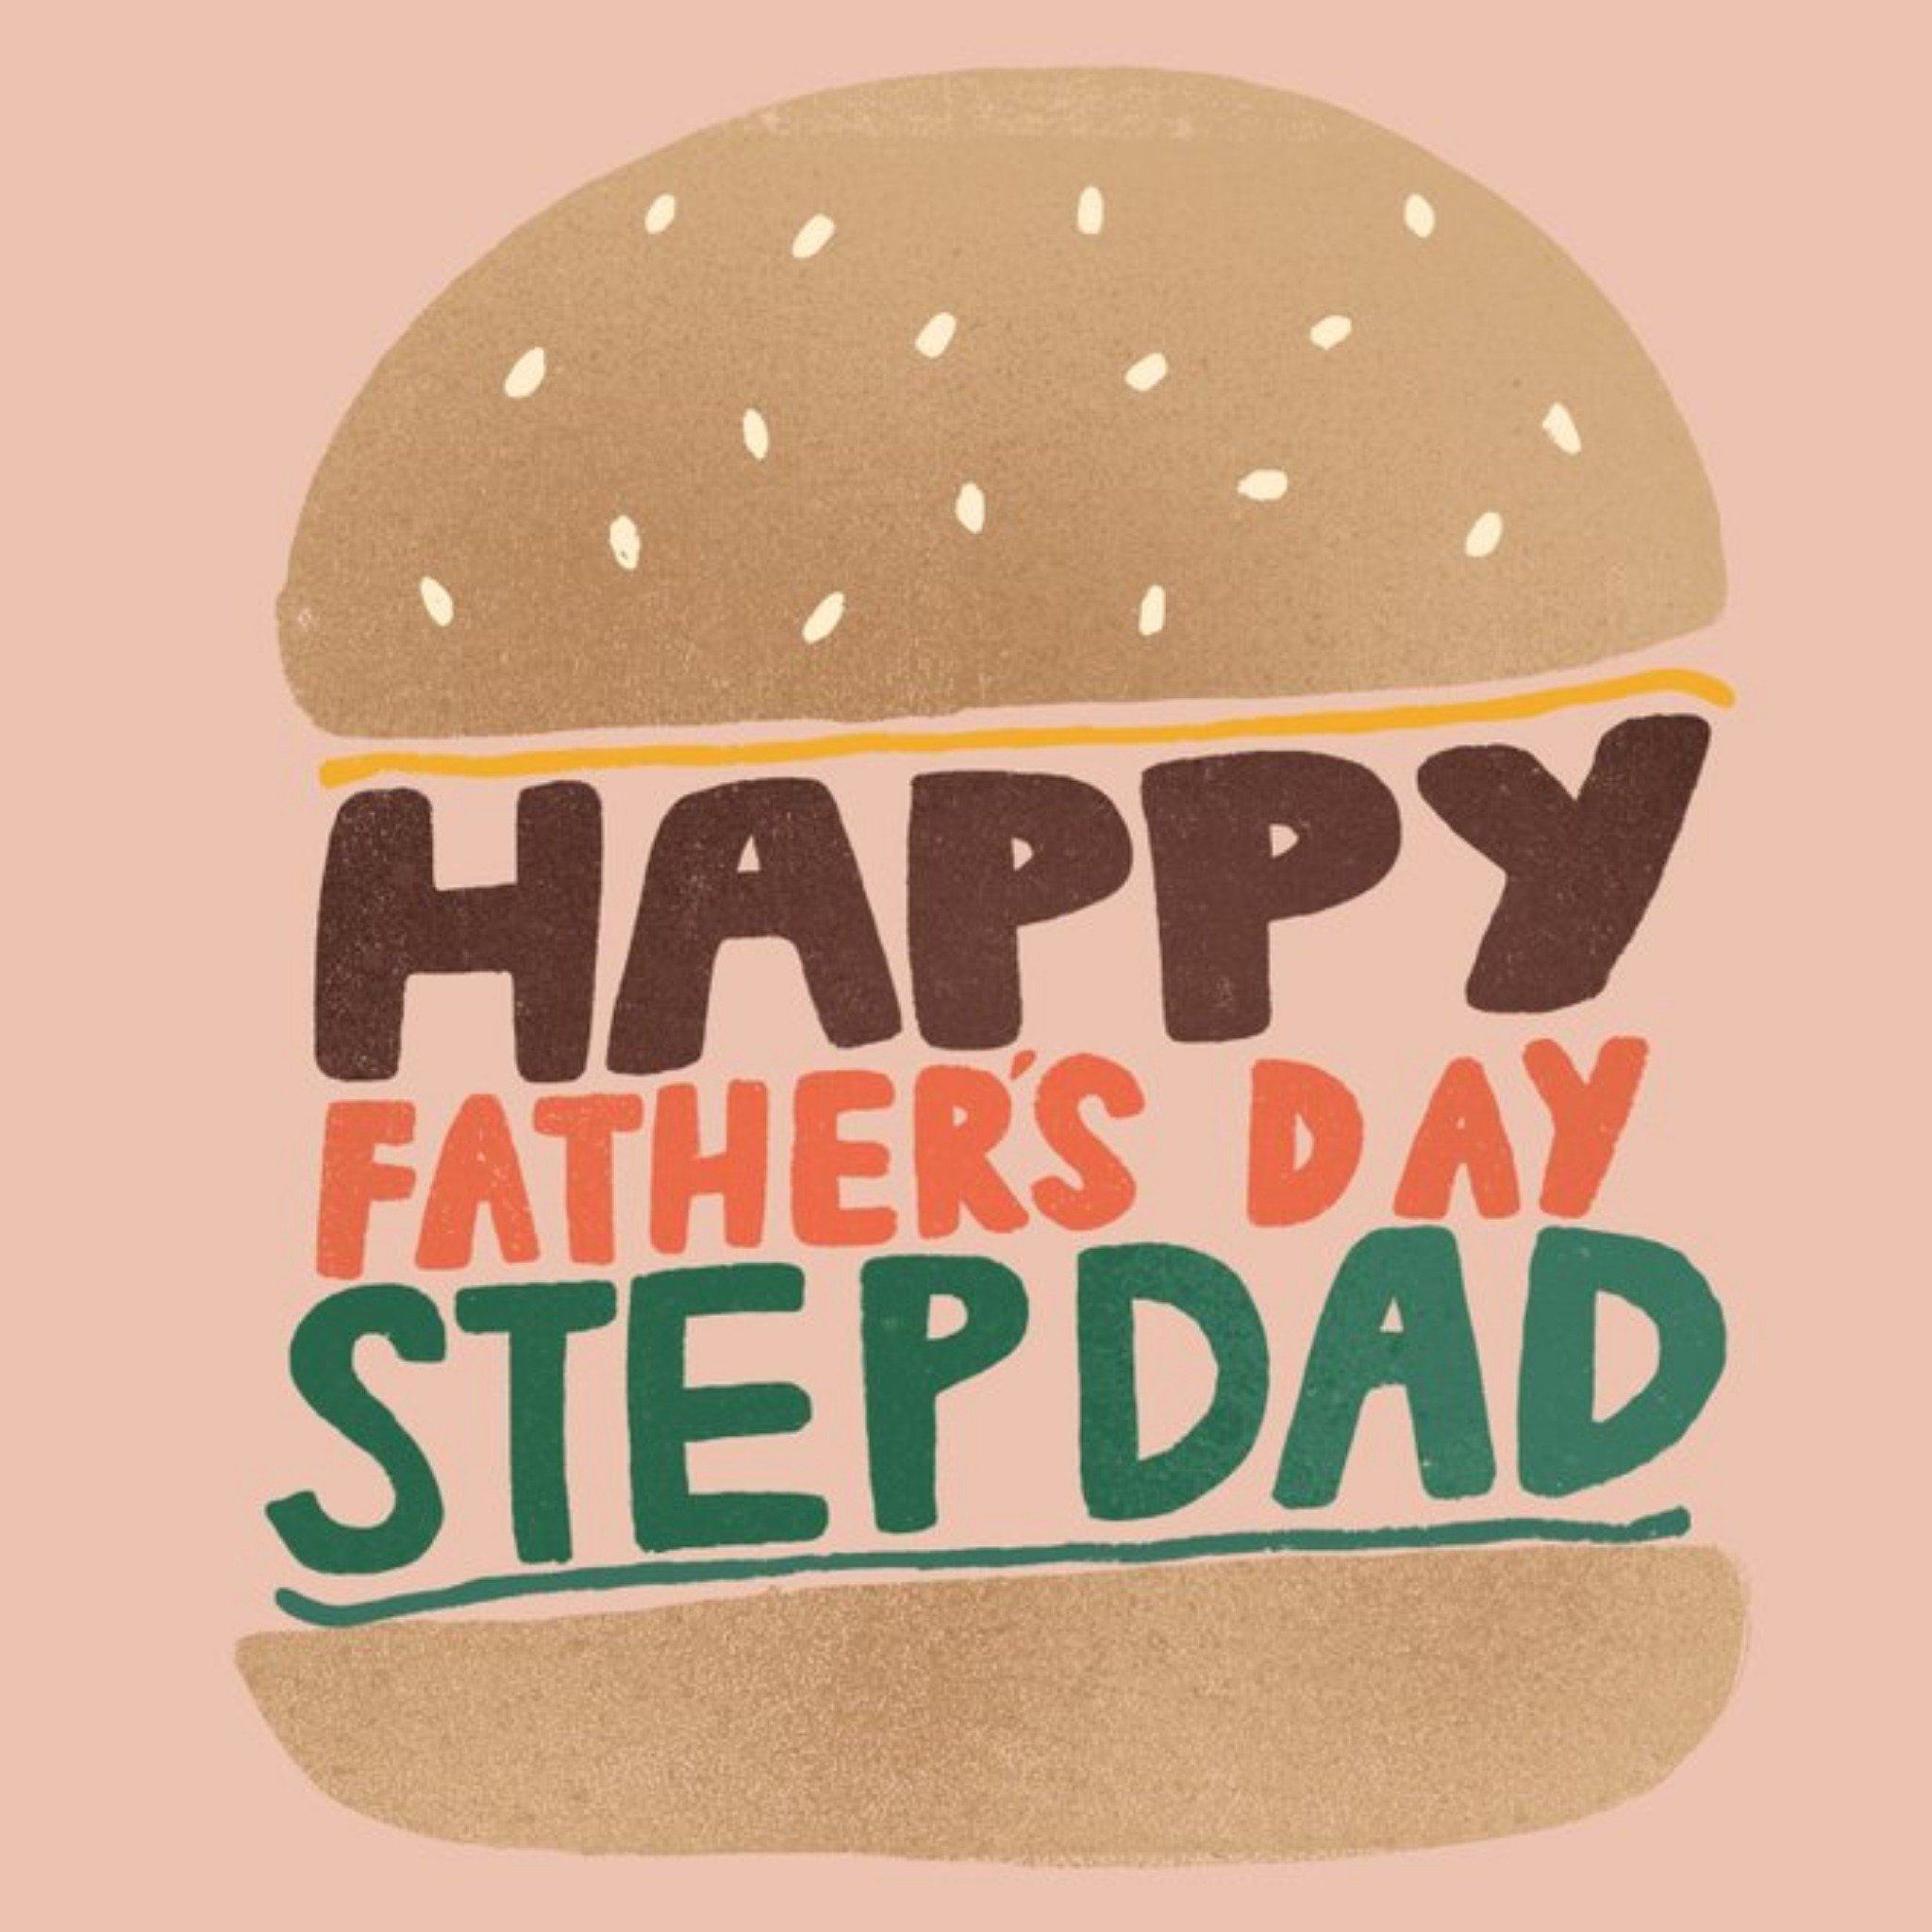 Moonpig Illustrated Burger Typographic Step Dad Father's Day Card, Large